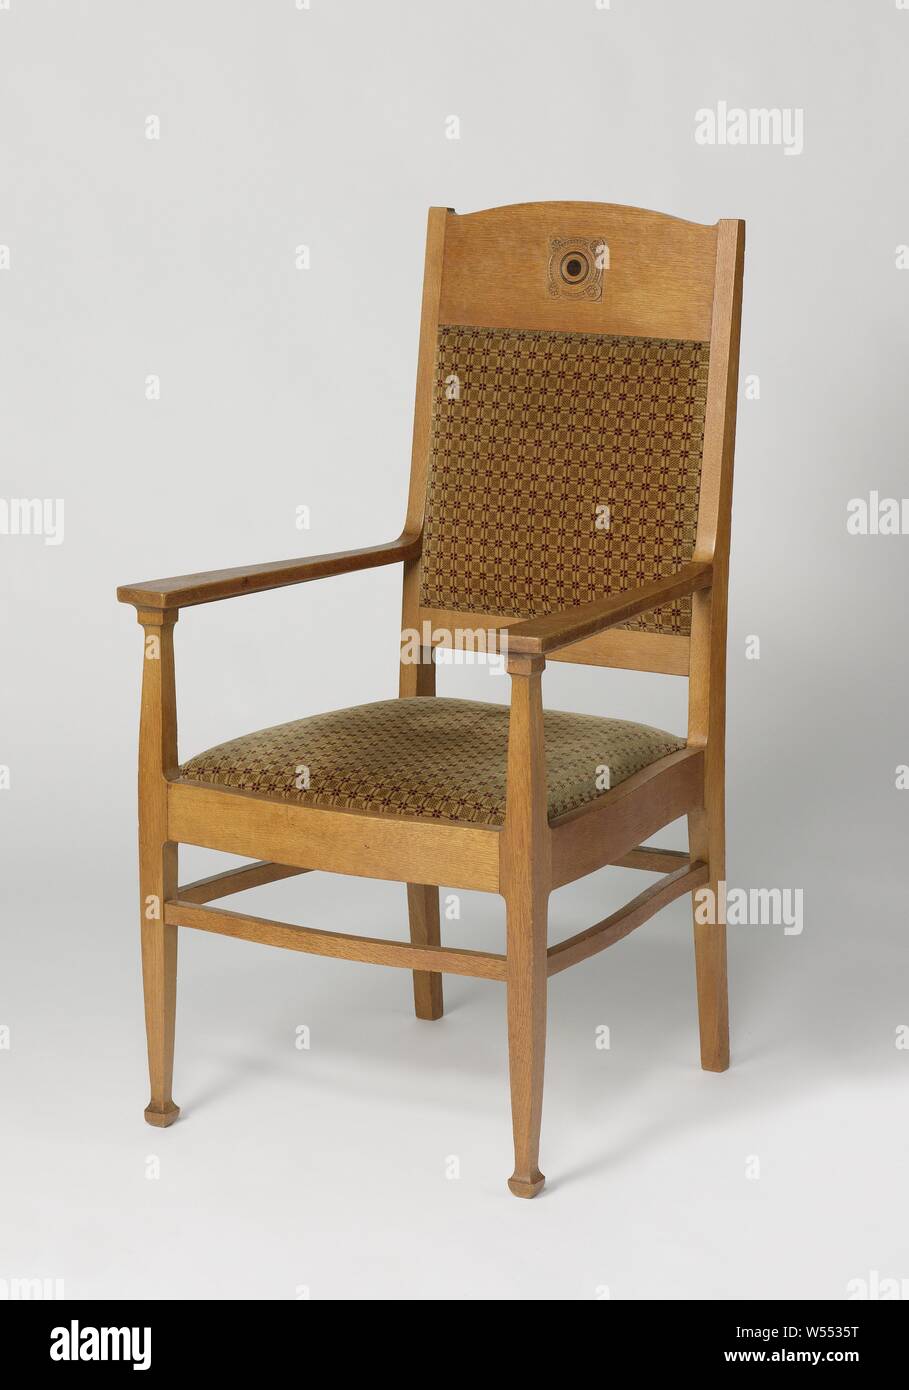 Armchair with a carved braided rosette and covered with green stripe with red diamond patterns, Armchair of oak resting on four curved legs. The legs are interconnected by means of curved lines. The front legs continue in the struts for the armrests. The hind legs continue in the back posts. The backrest consists of a panel with a rounded top on the top and a line on the bottom. The open space in between is covered with green cloth with red diamond motifs. On the panel at the top is a carved braided rosette with pearl edges and inlaid with ebony in the middle. The armrests widen to the front Stock Photo